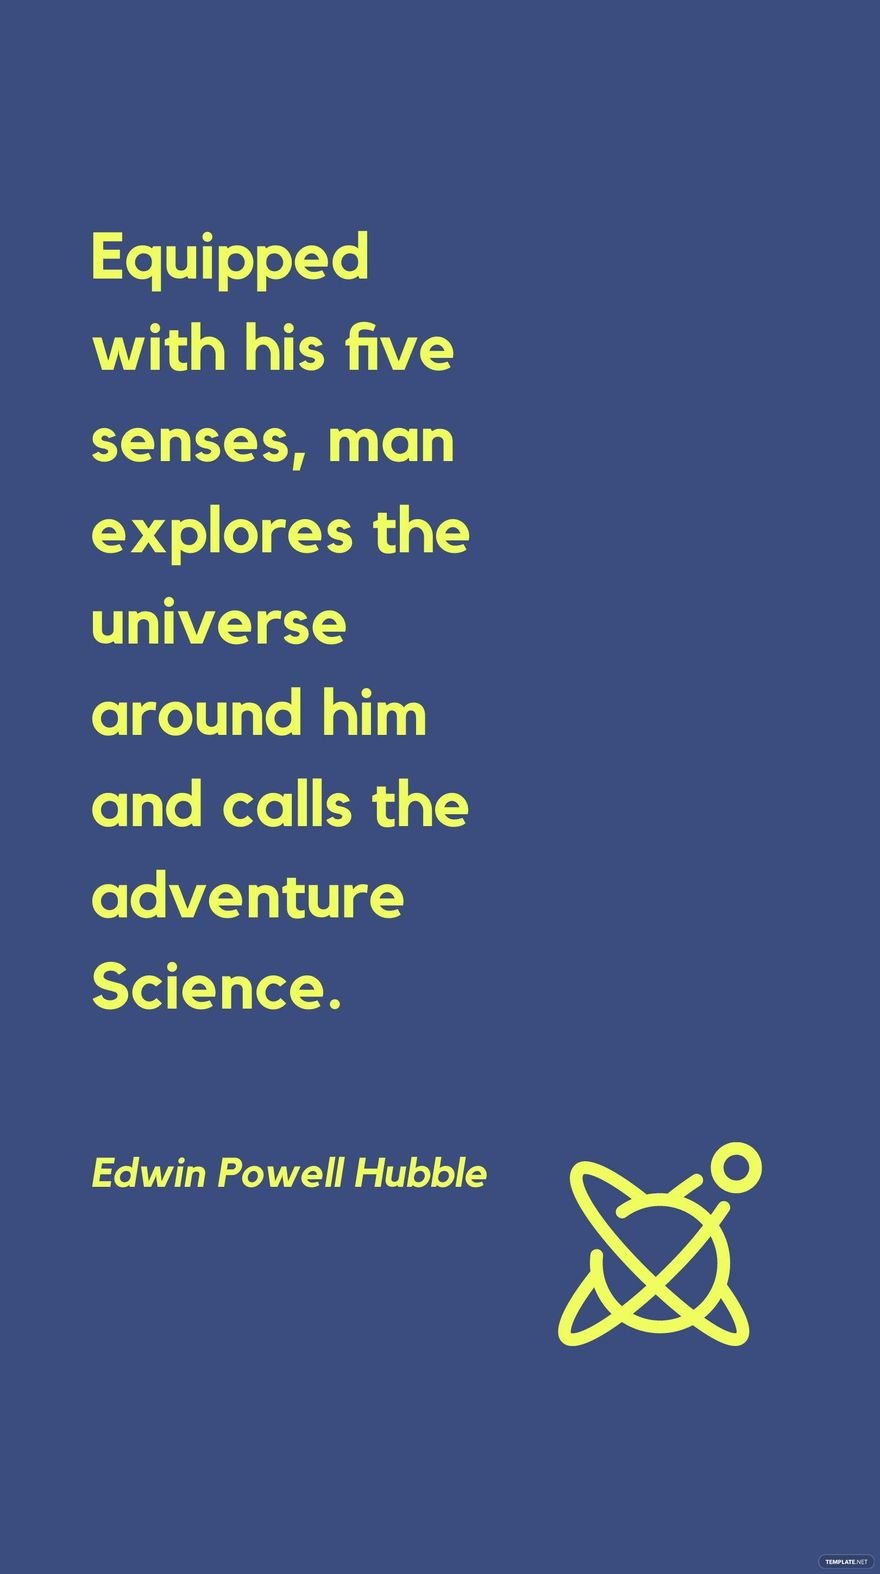 Free Edwin Powell Hubble - Equipped with his five senses, man explores the universe around him and calls the adventure Science. in JPG